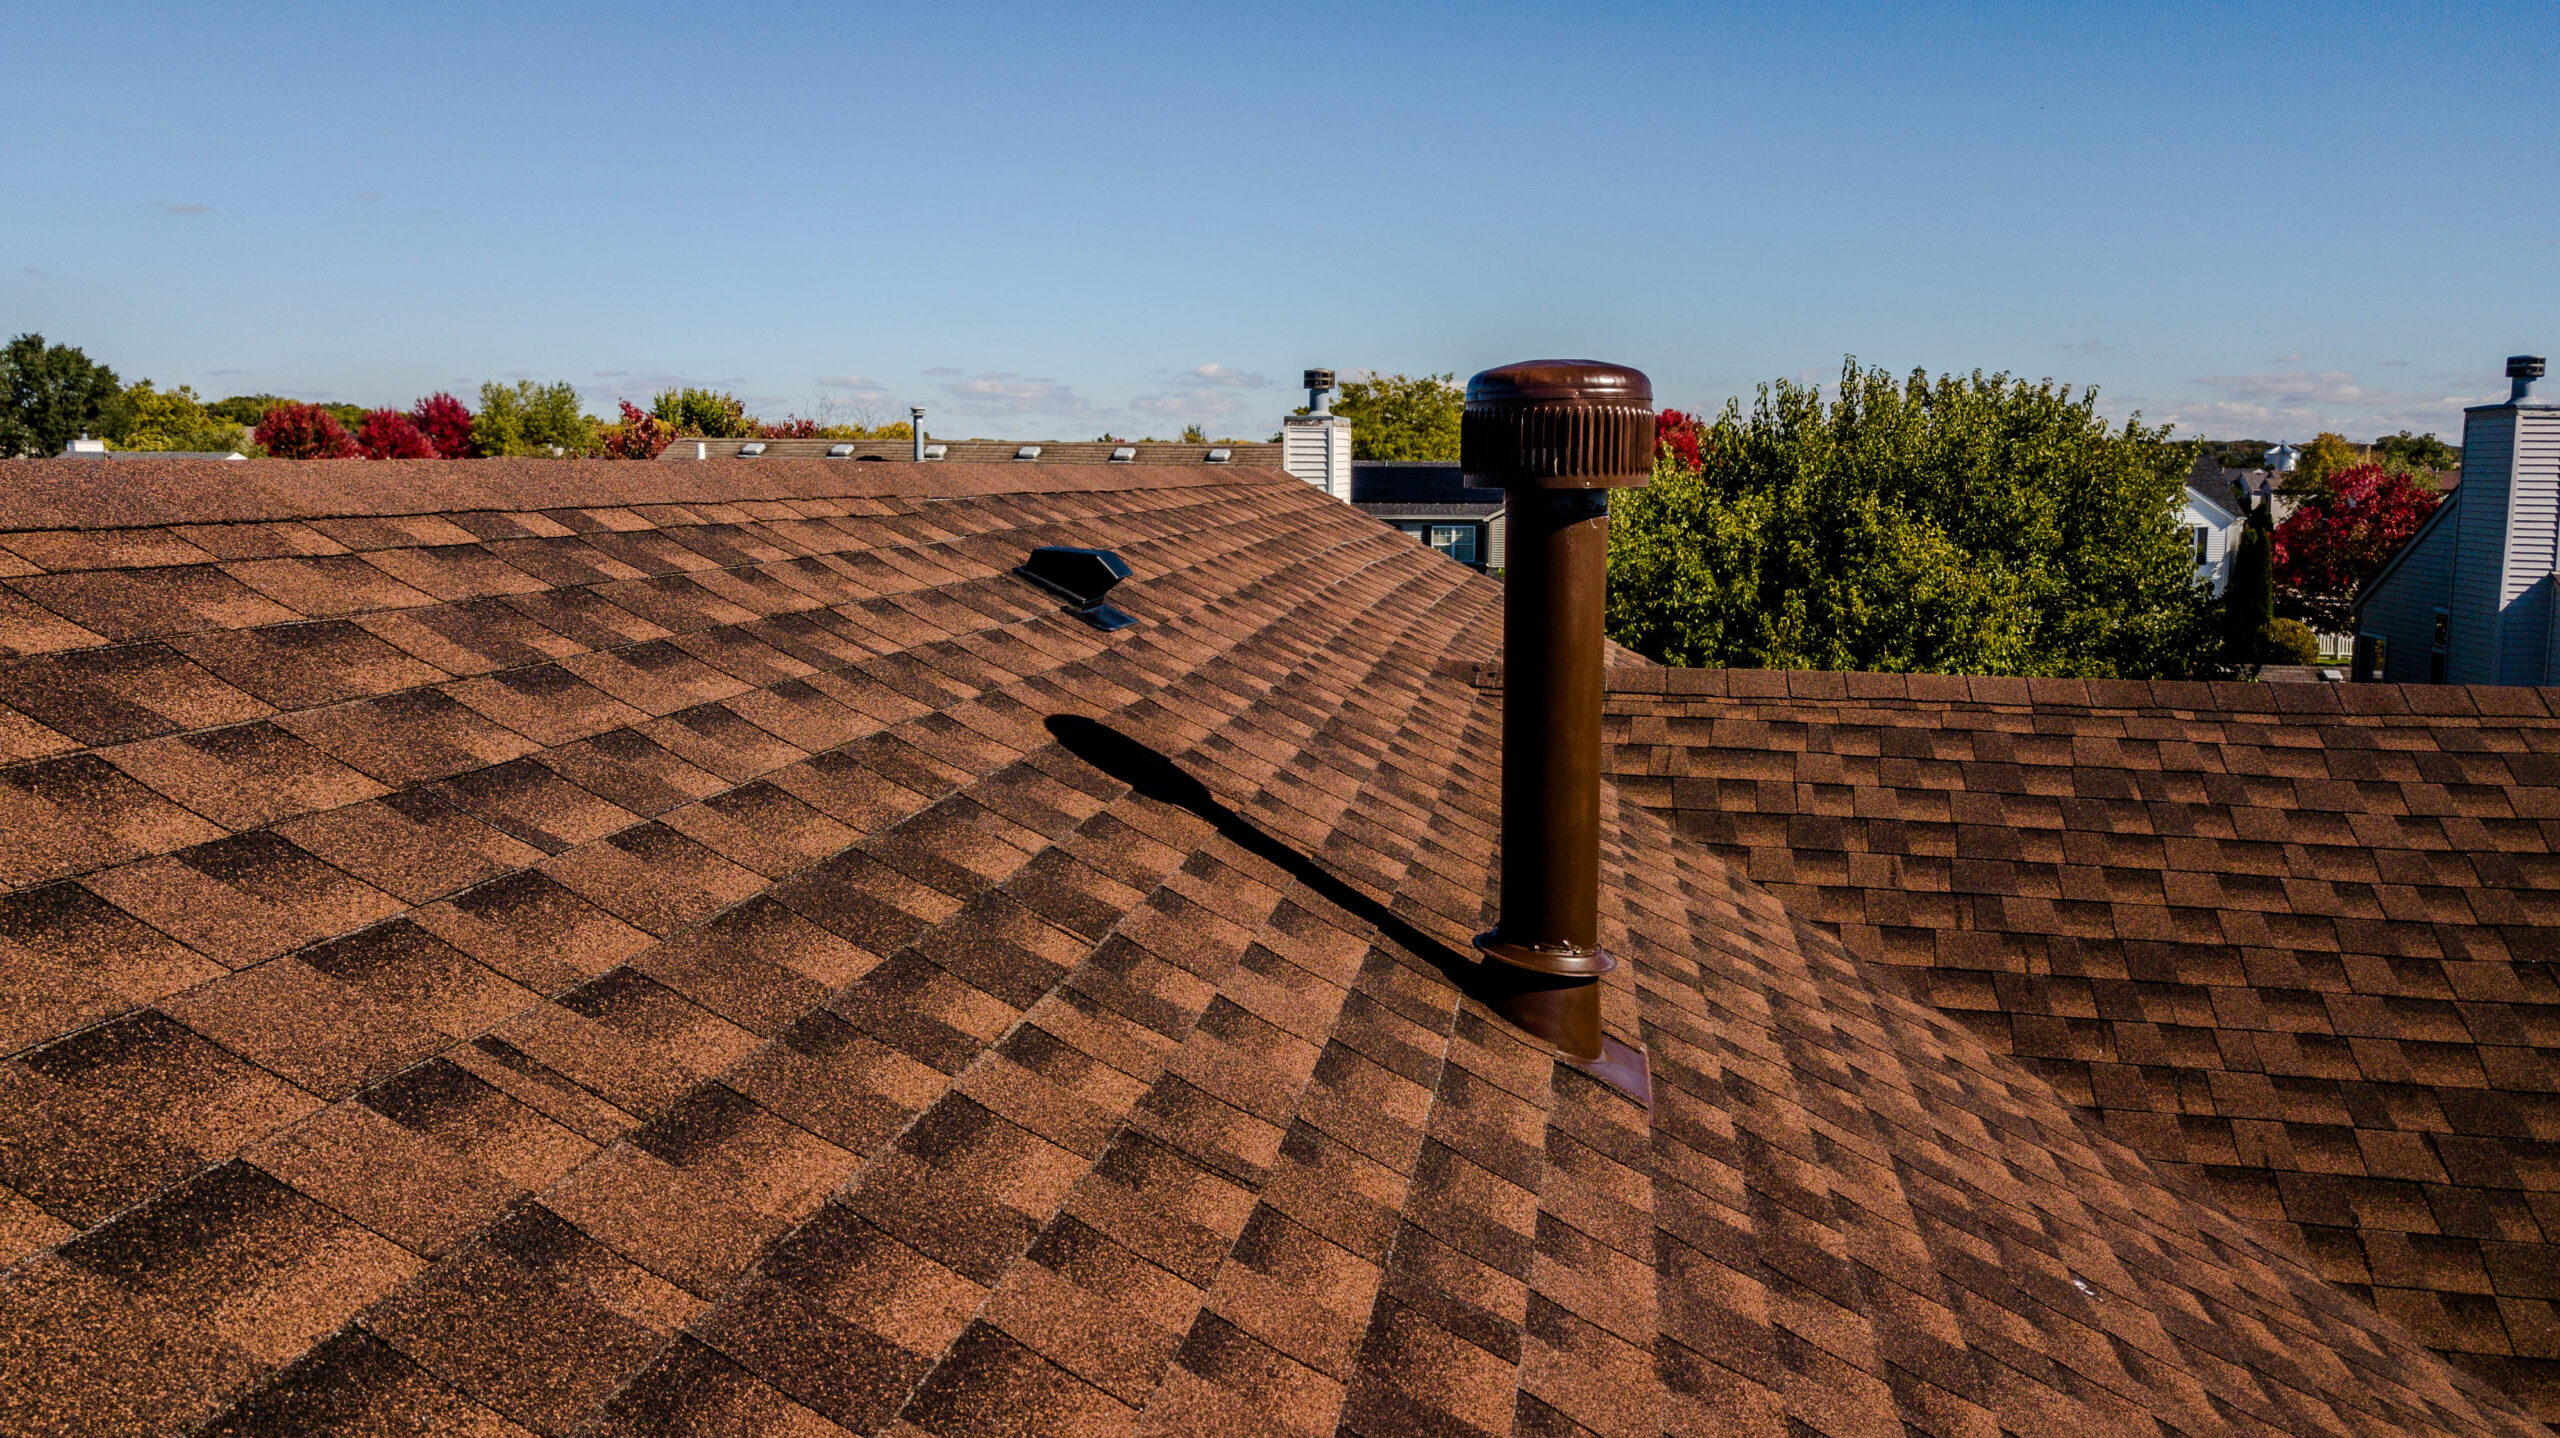 Photograph of roof inspection taken by drone photography.